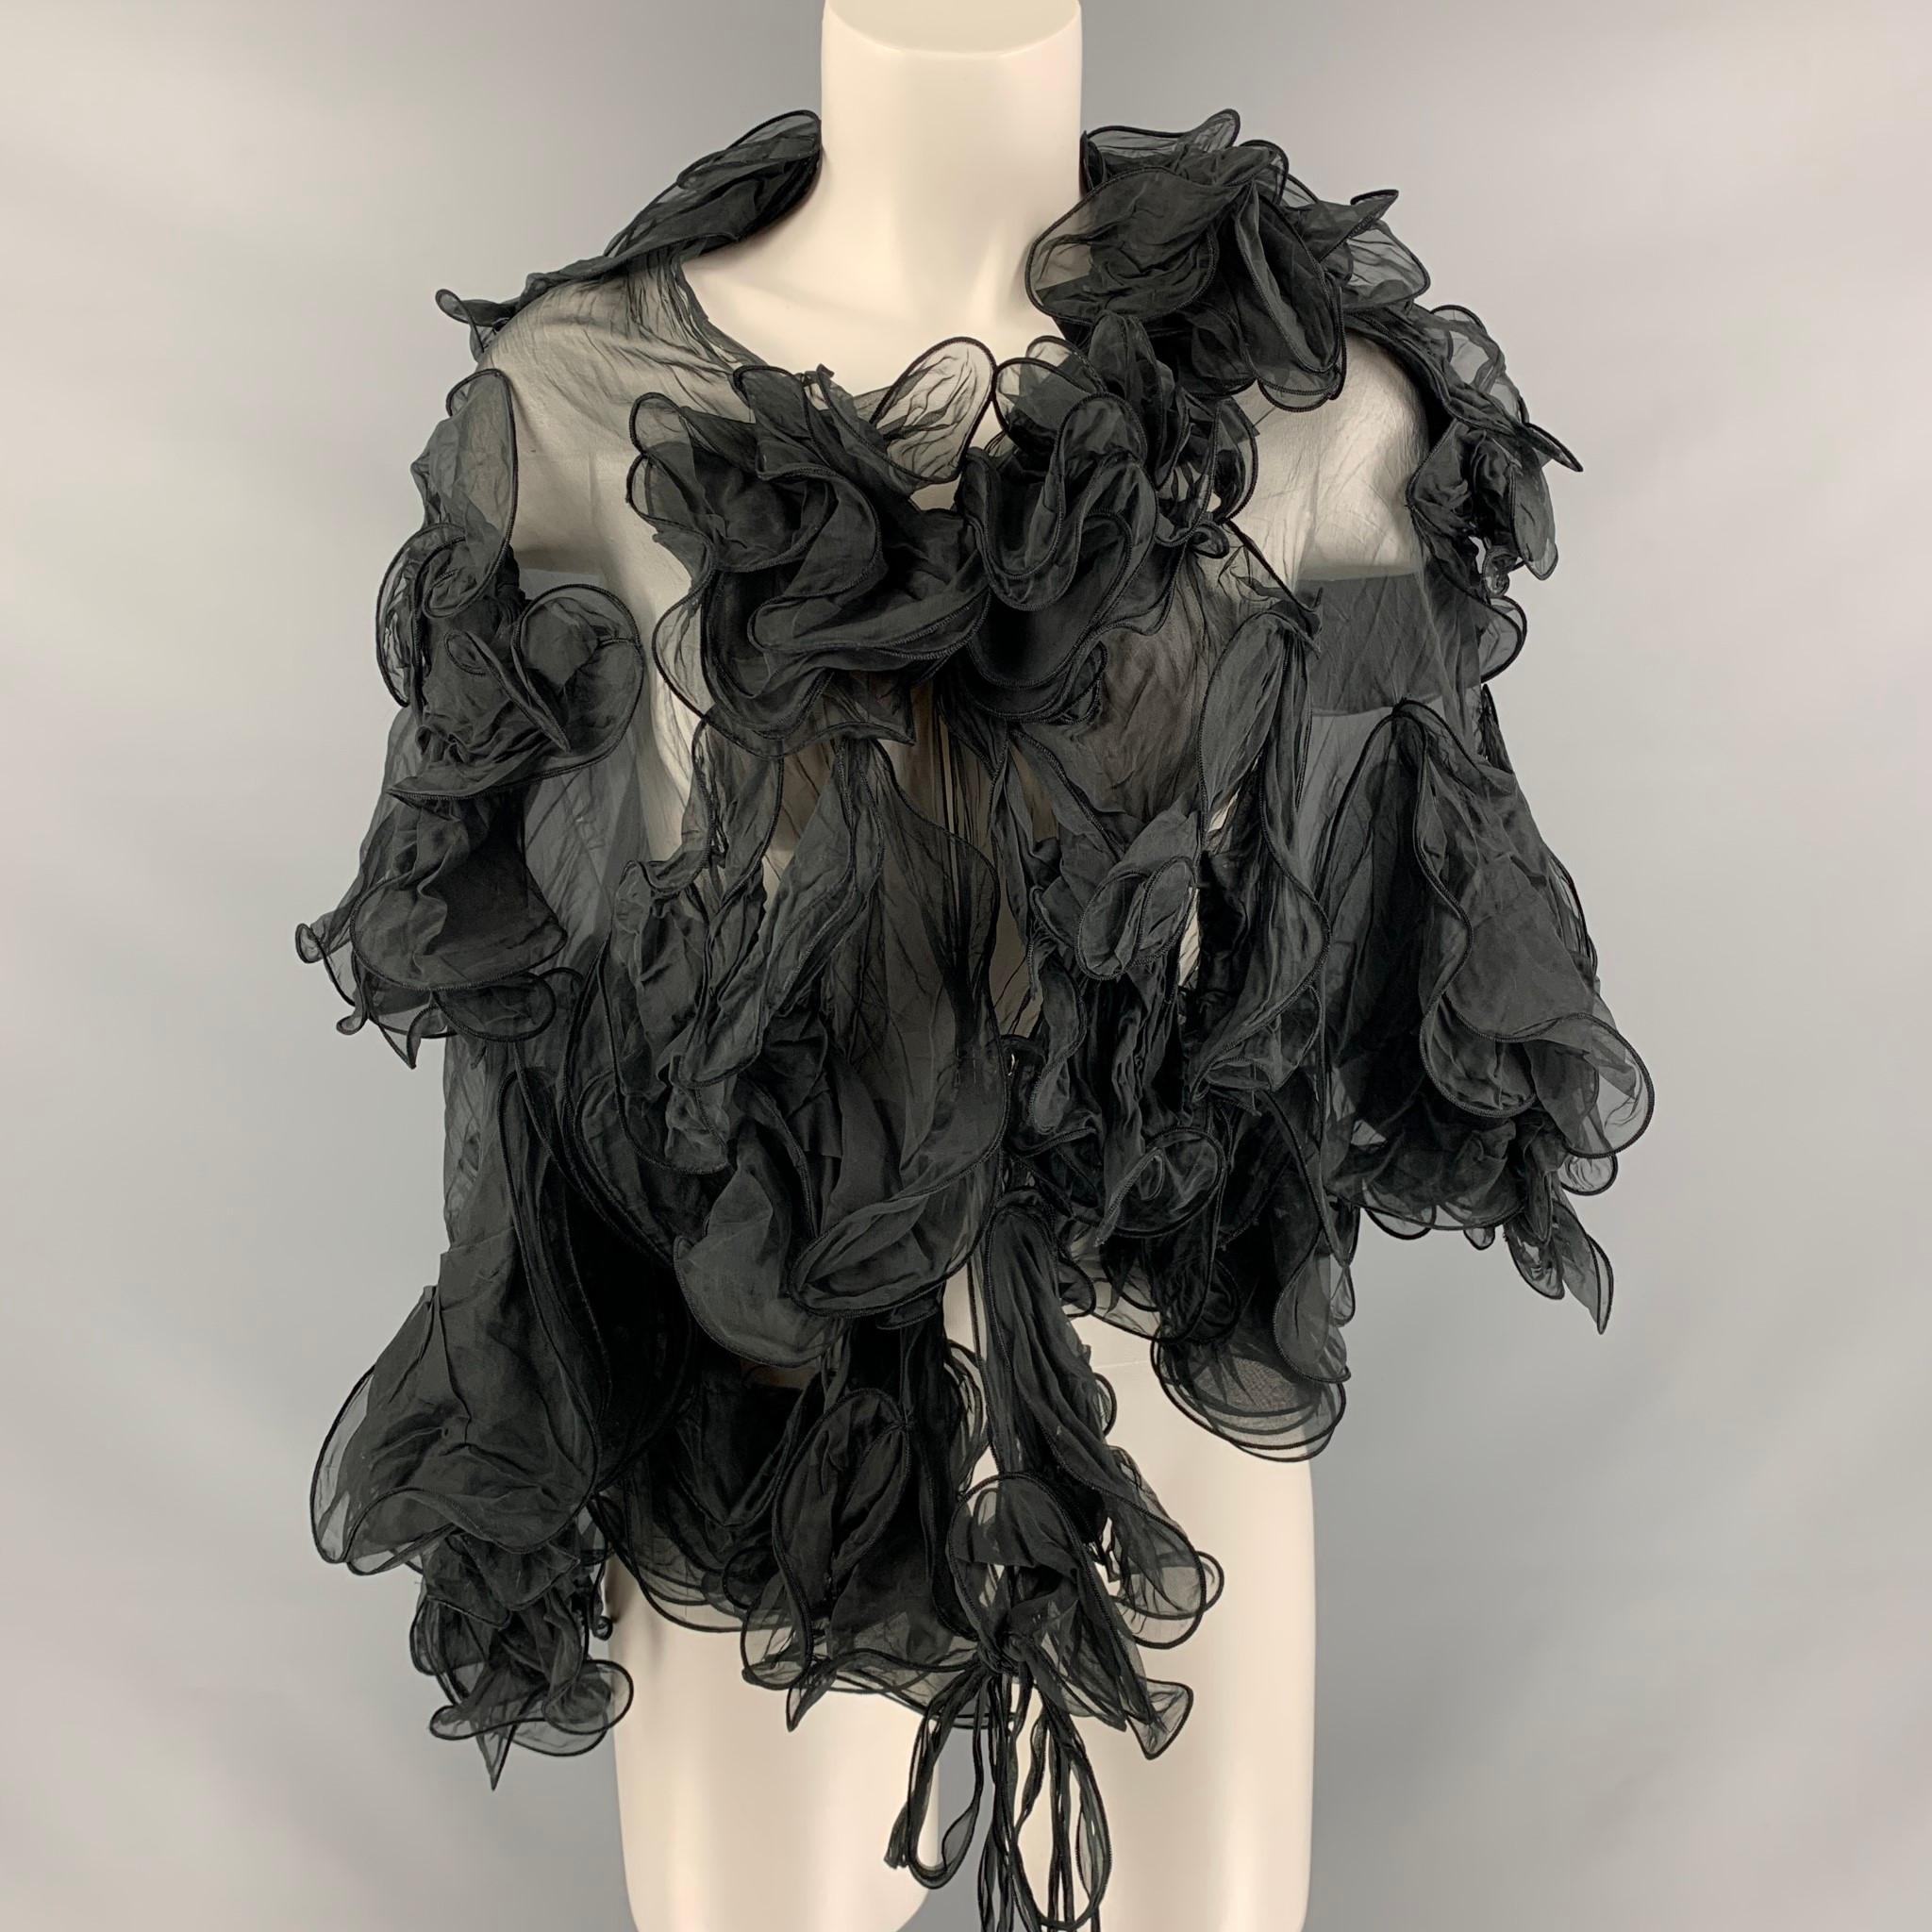 GIORGIO ARMANI scarves & shawls comes in a black silk featuring a tie at waist. Made in Italy

Very Good Pre-Owned Condition.
Marked: One size

Measurements:

Shoulder: 17 in
Length: 19 in 

 

SKU: 112291
Category: Scarves & Shawls

More